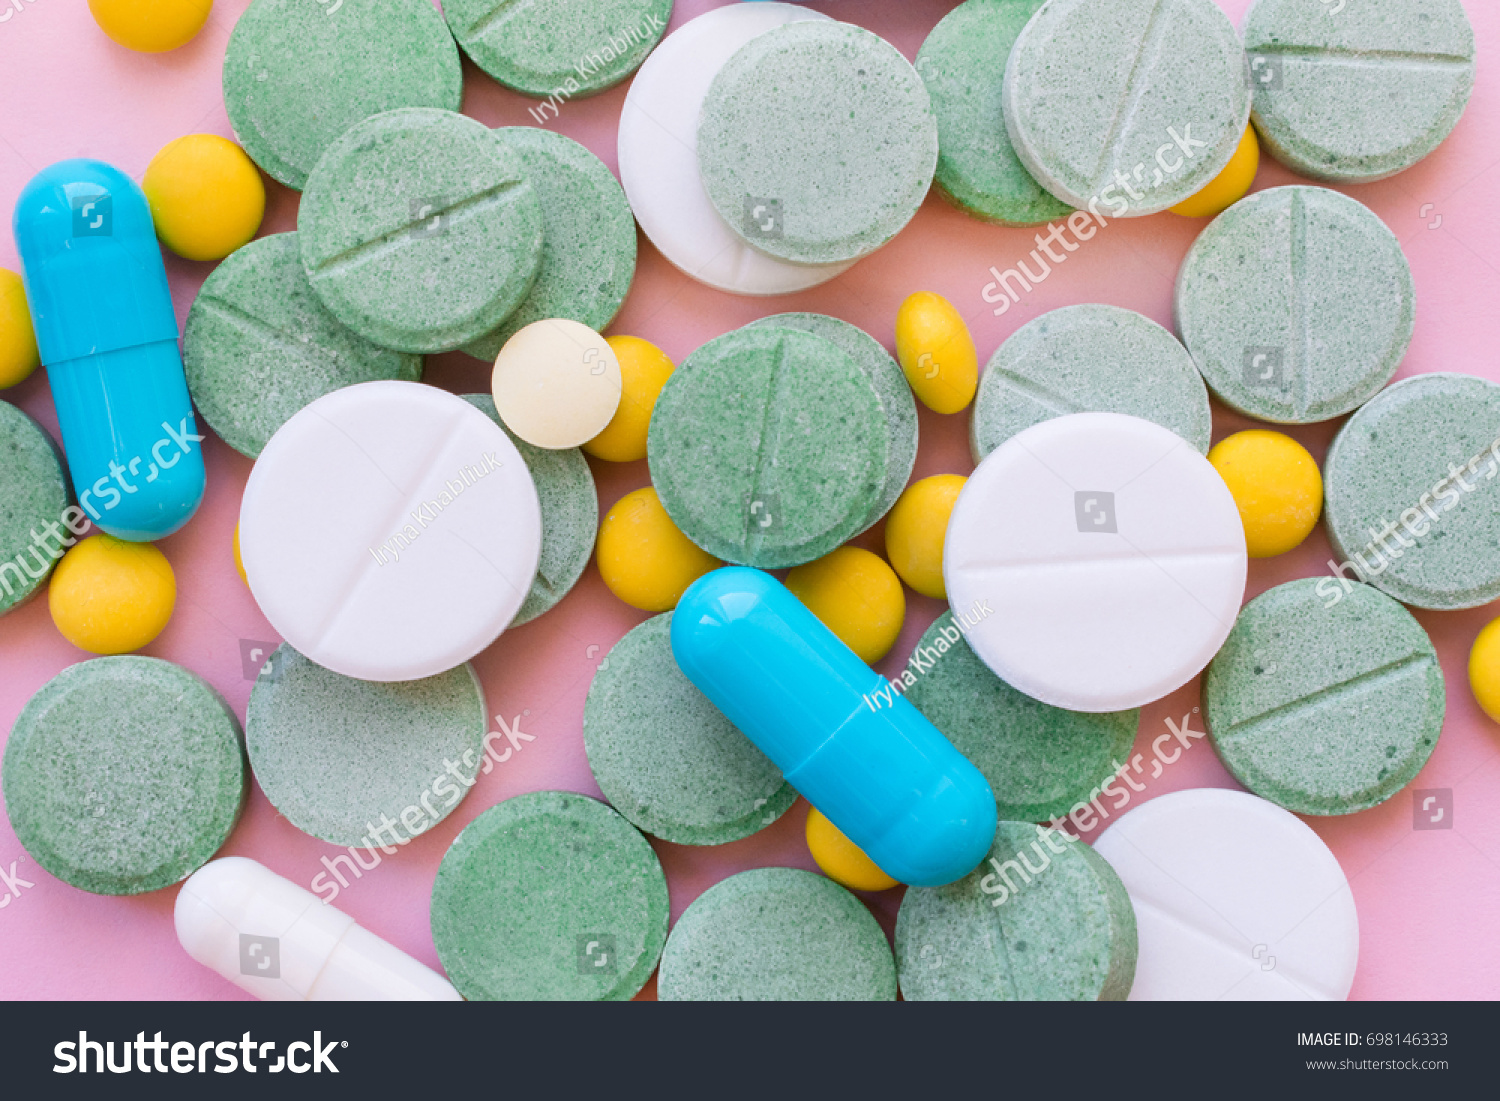 Opioid Pills. Opioid epidemic and drug abuse concept. Different tablets, pills, capsule on a pink background.  Heap mix therapy drugs.  #698146333